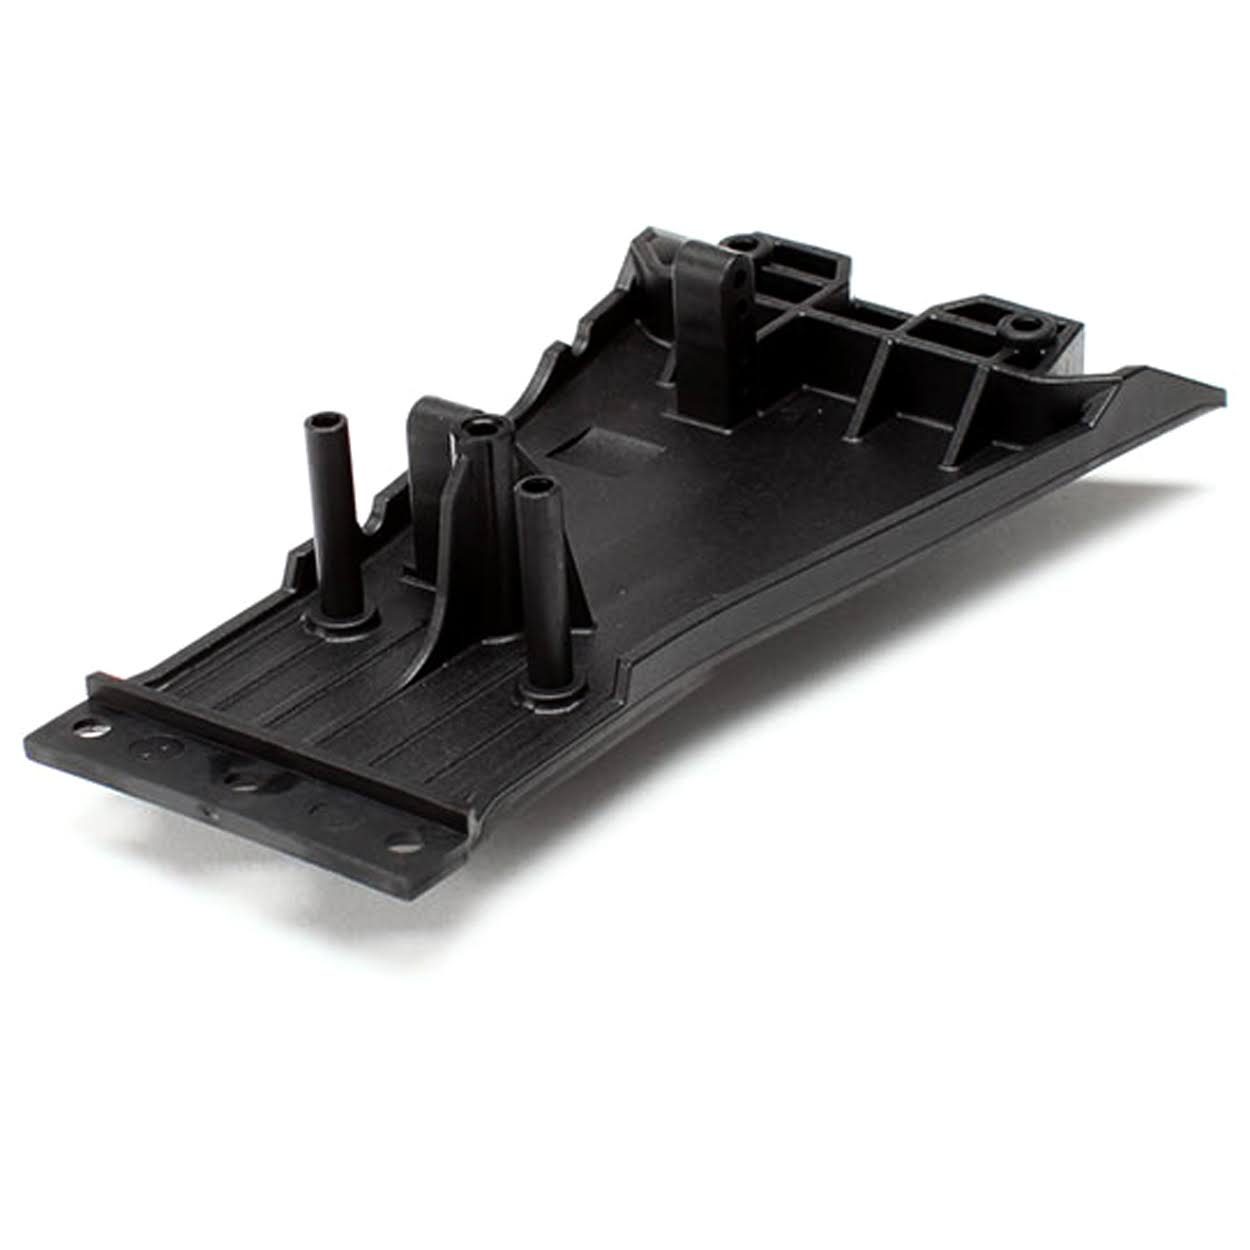 Traxxas 5831 Lower Chassis Low CG - Black